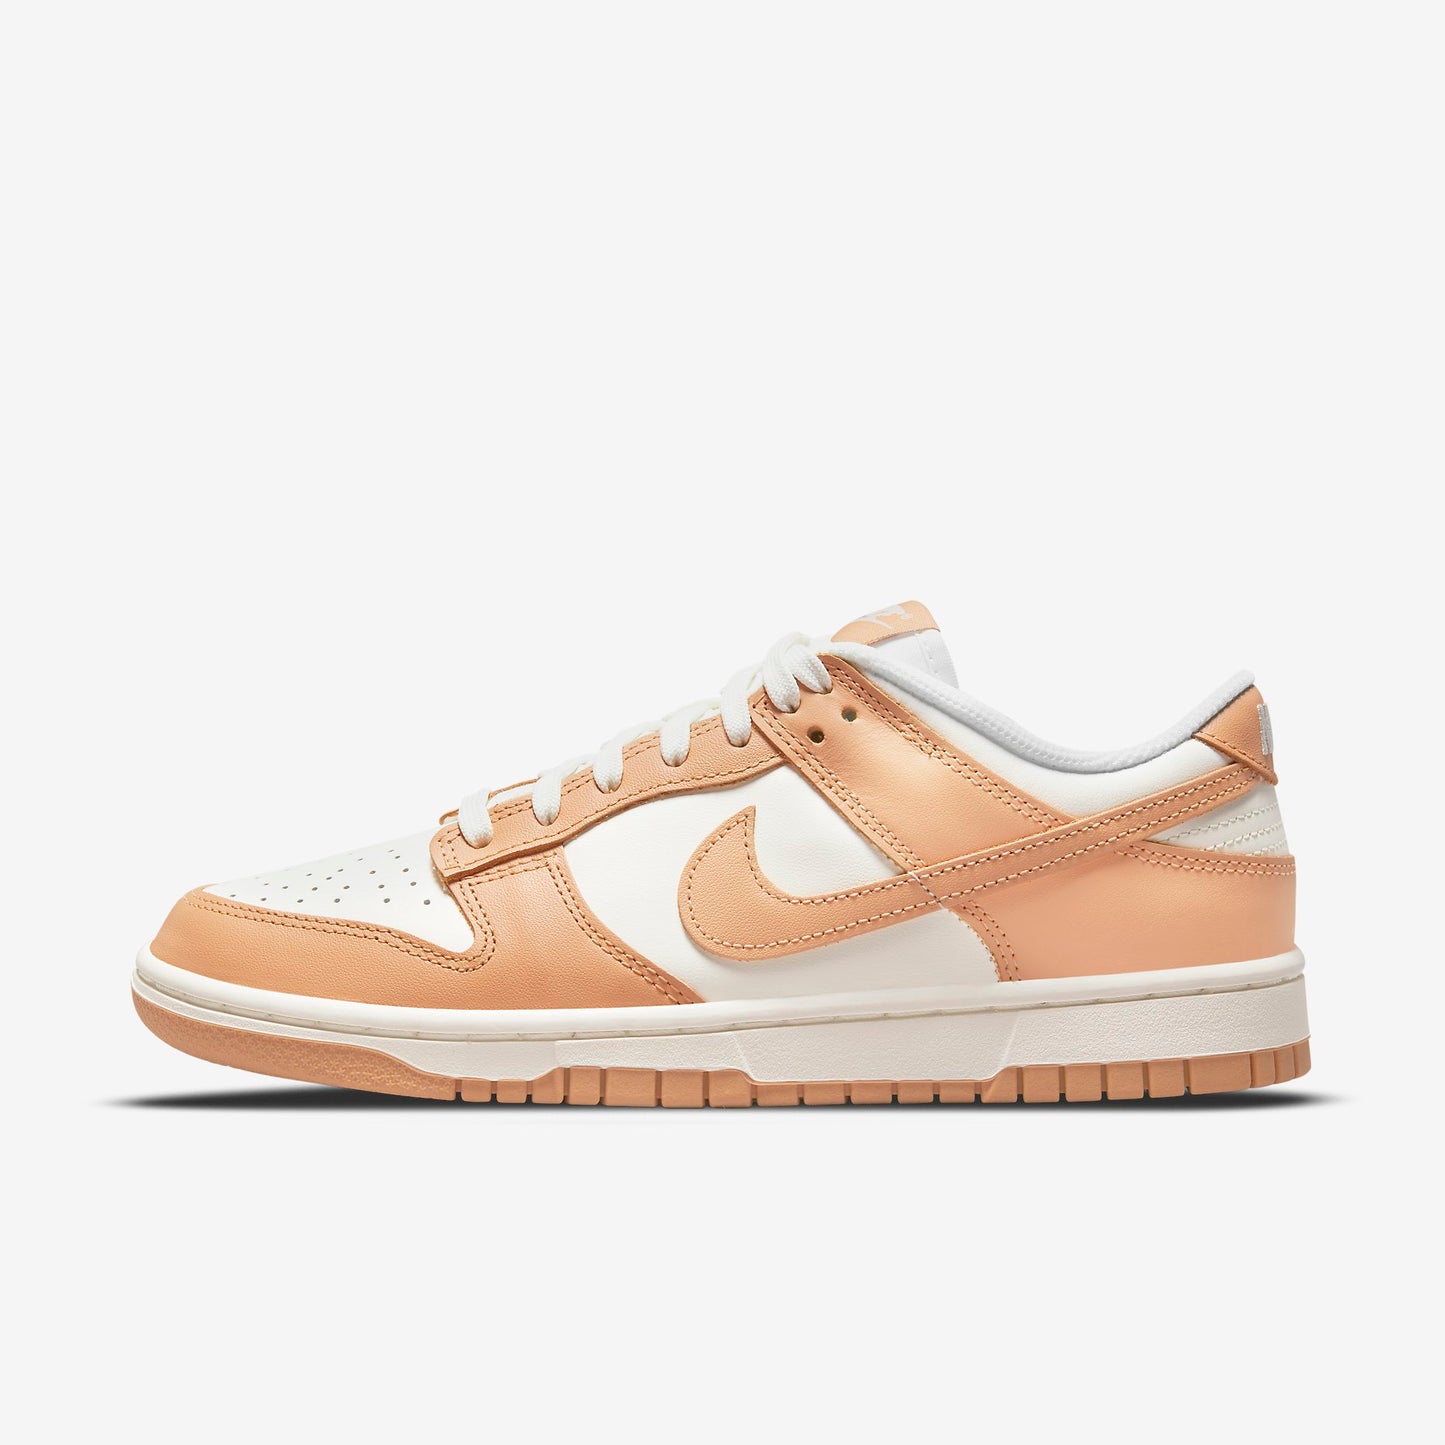 Nike Dunk Low Light Brown - Lit Fitters Portugal